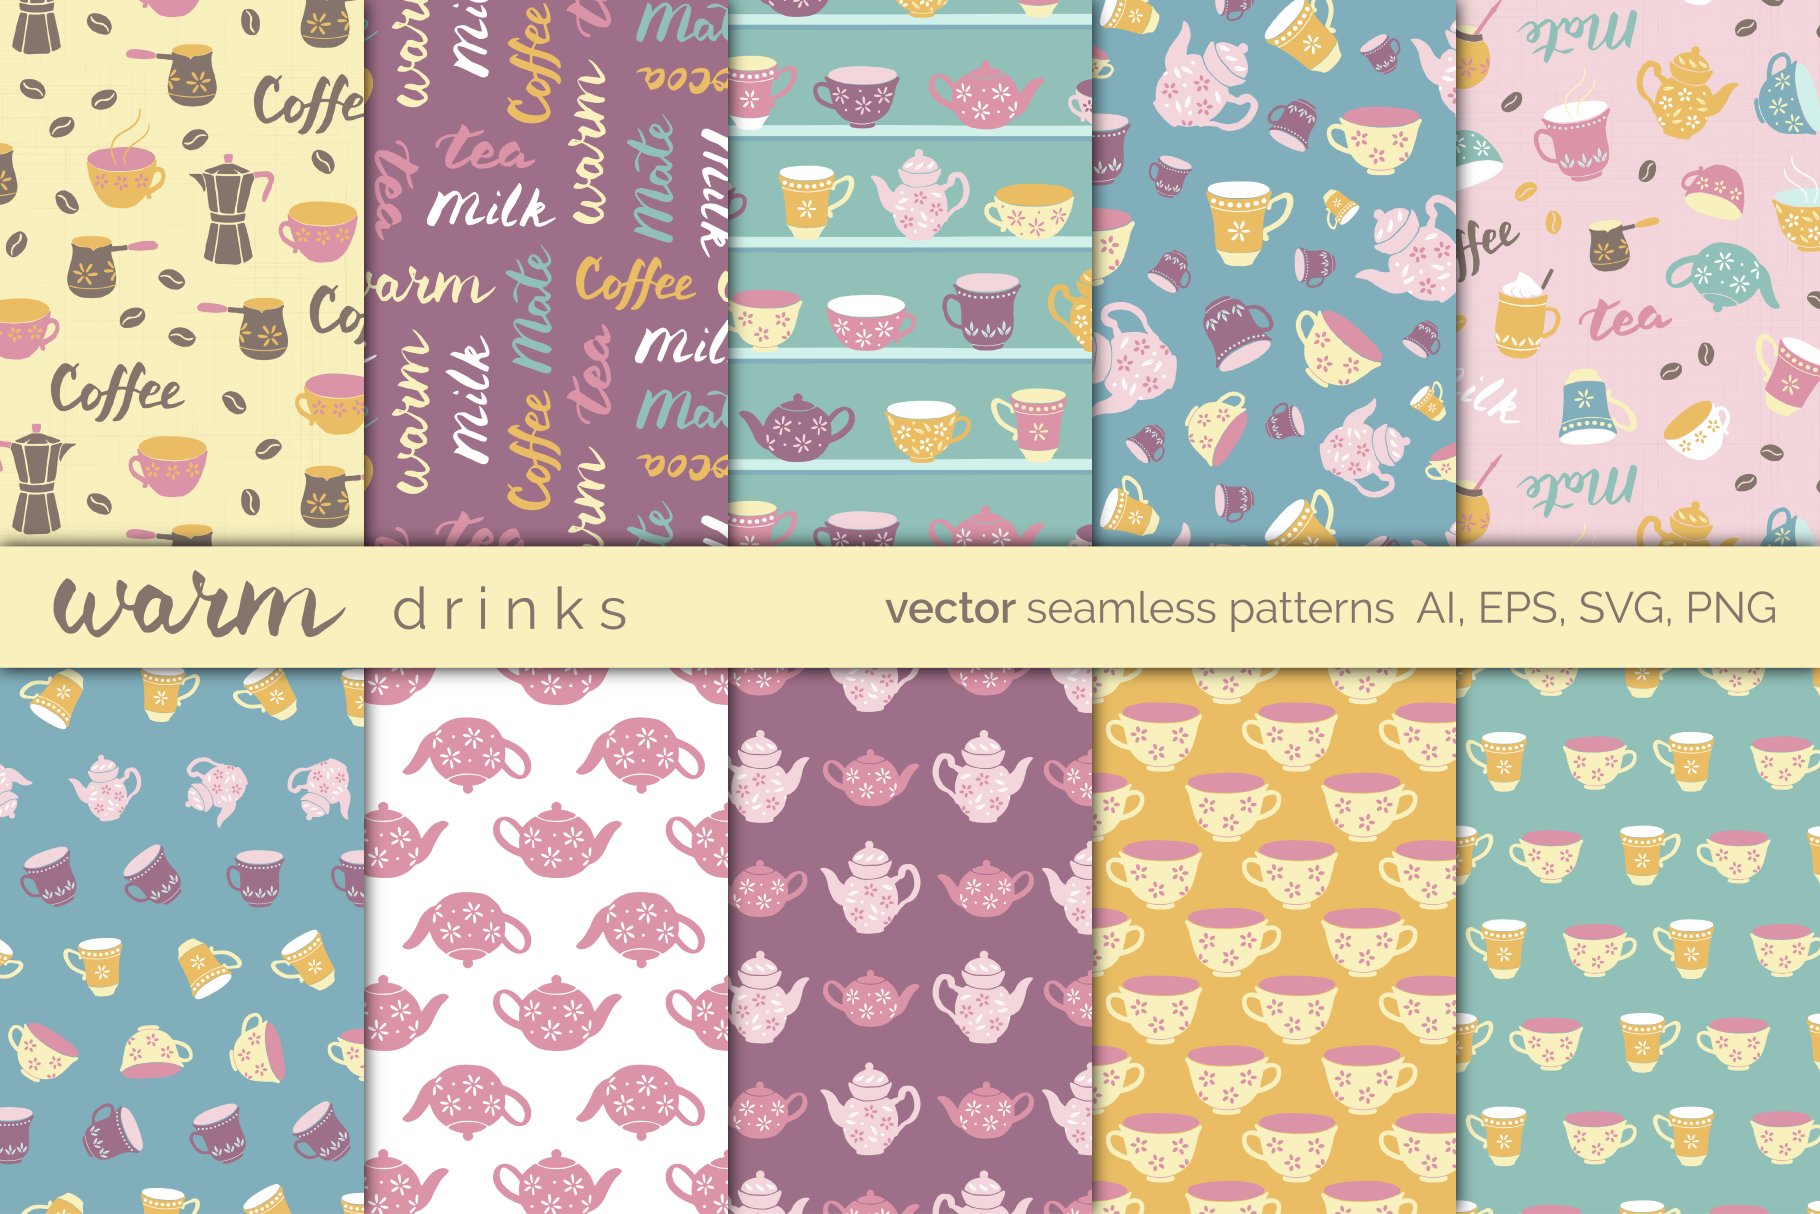 Tea and Coffee Seamless Patterns cover image.